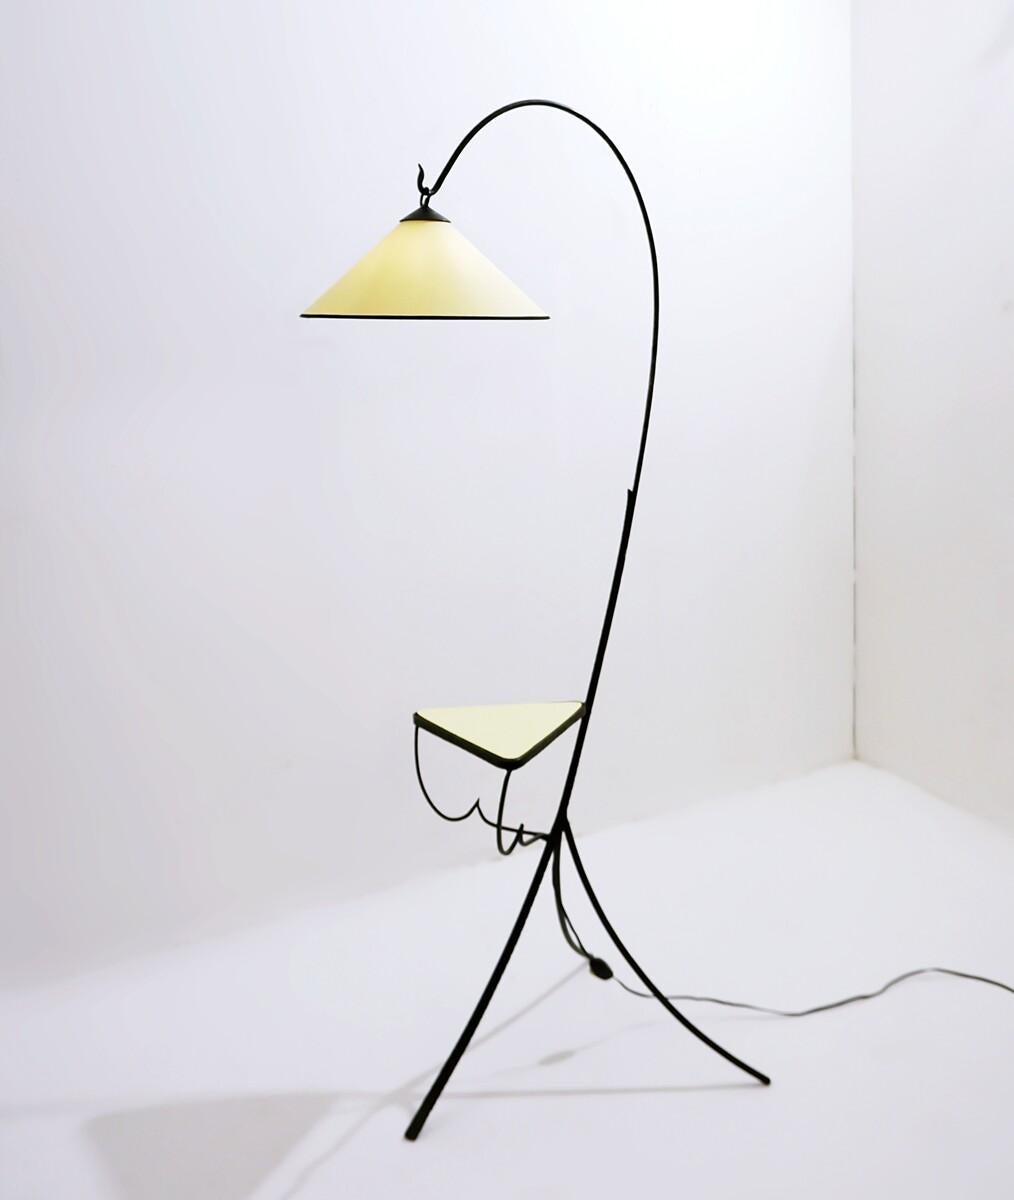 Mid-Century Wrought Iron Tripod Floor Lamp with Shelf, Italy, 1960s For Sale 4